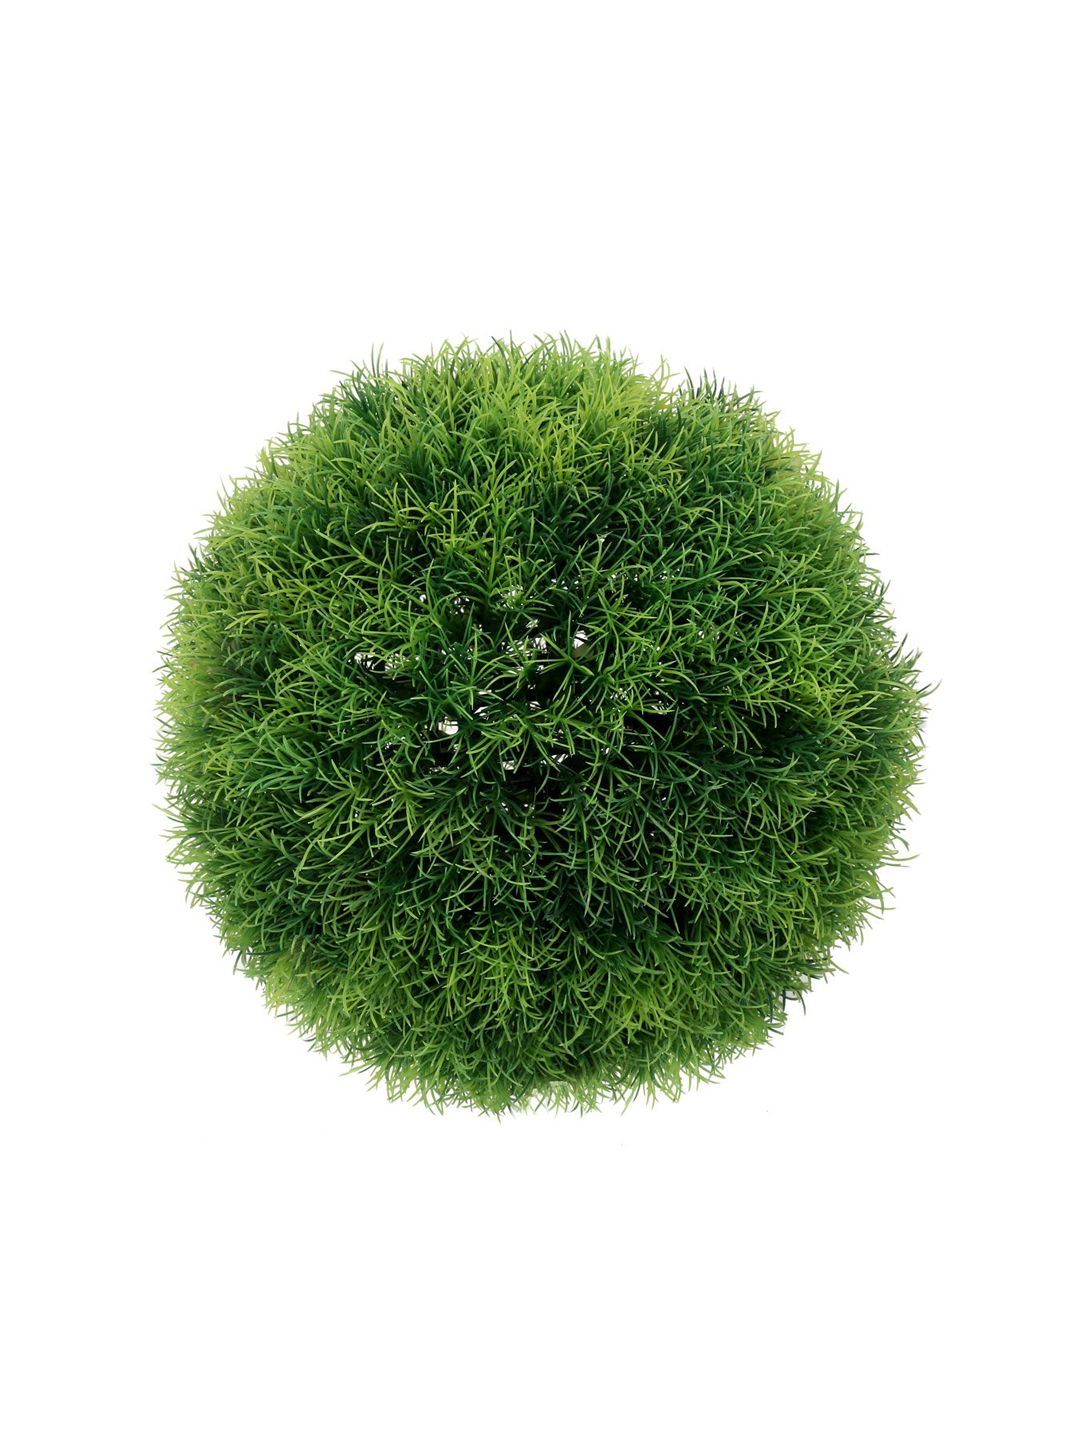 Athome by Nilkamal Green Moss Light Small Ball Planter Price in India